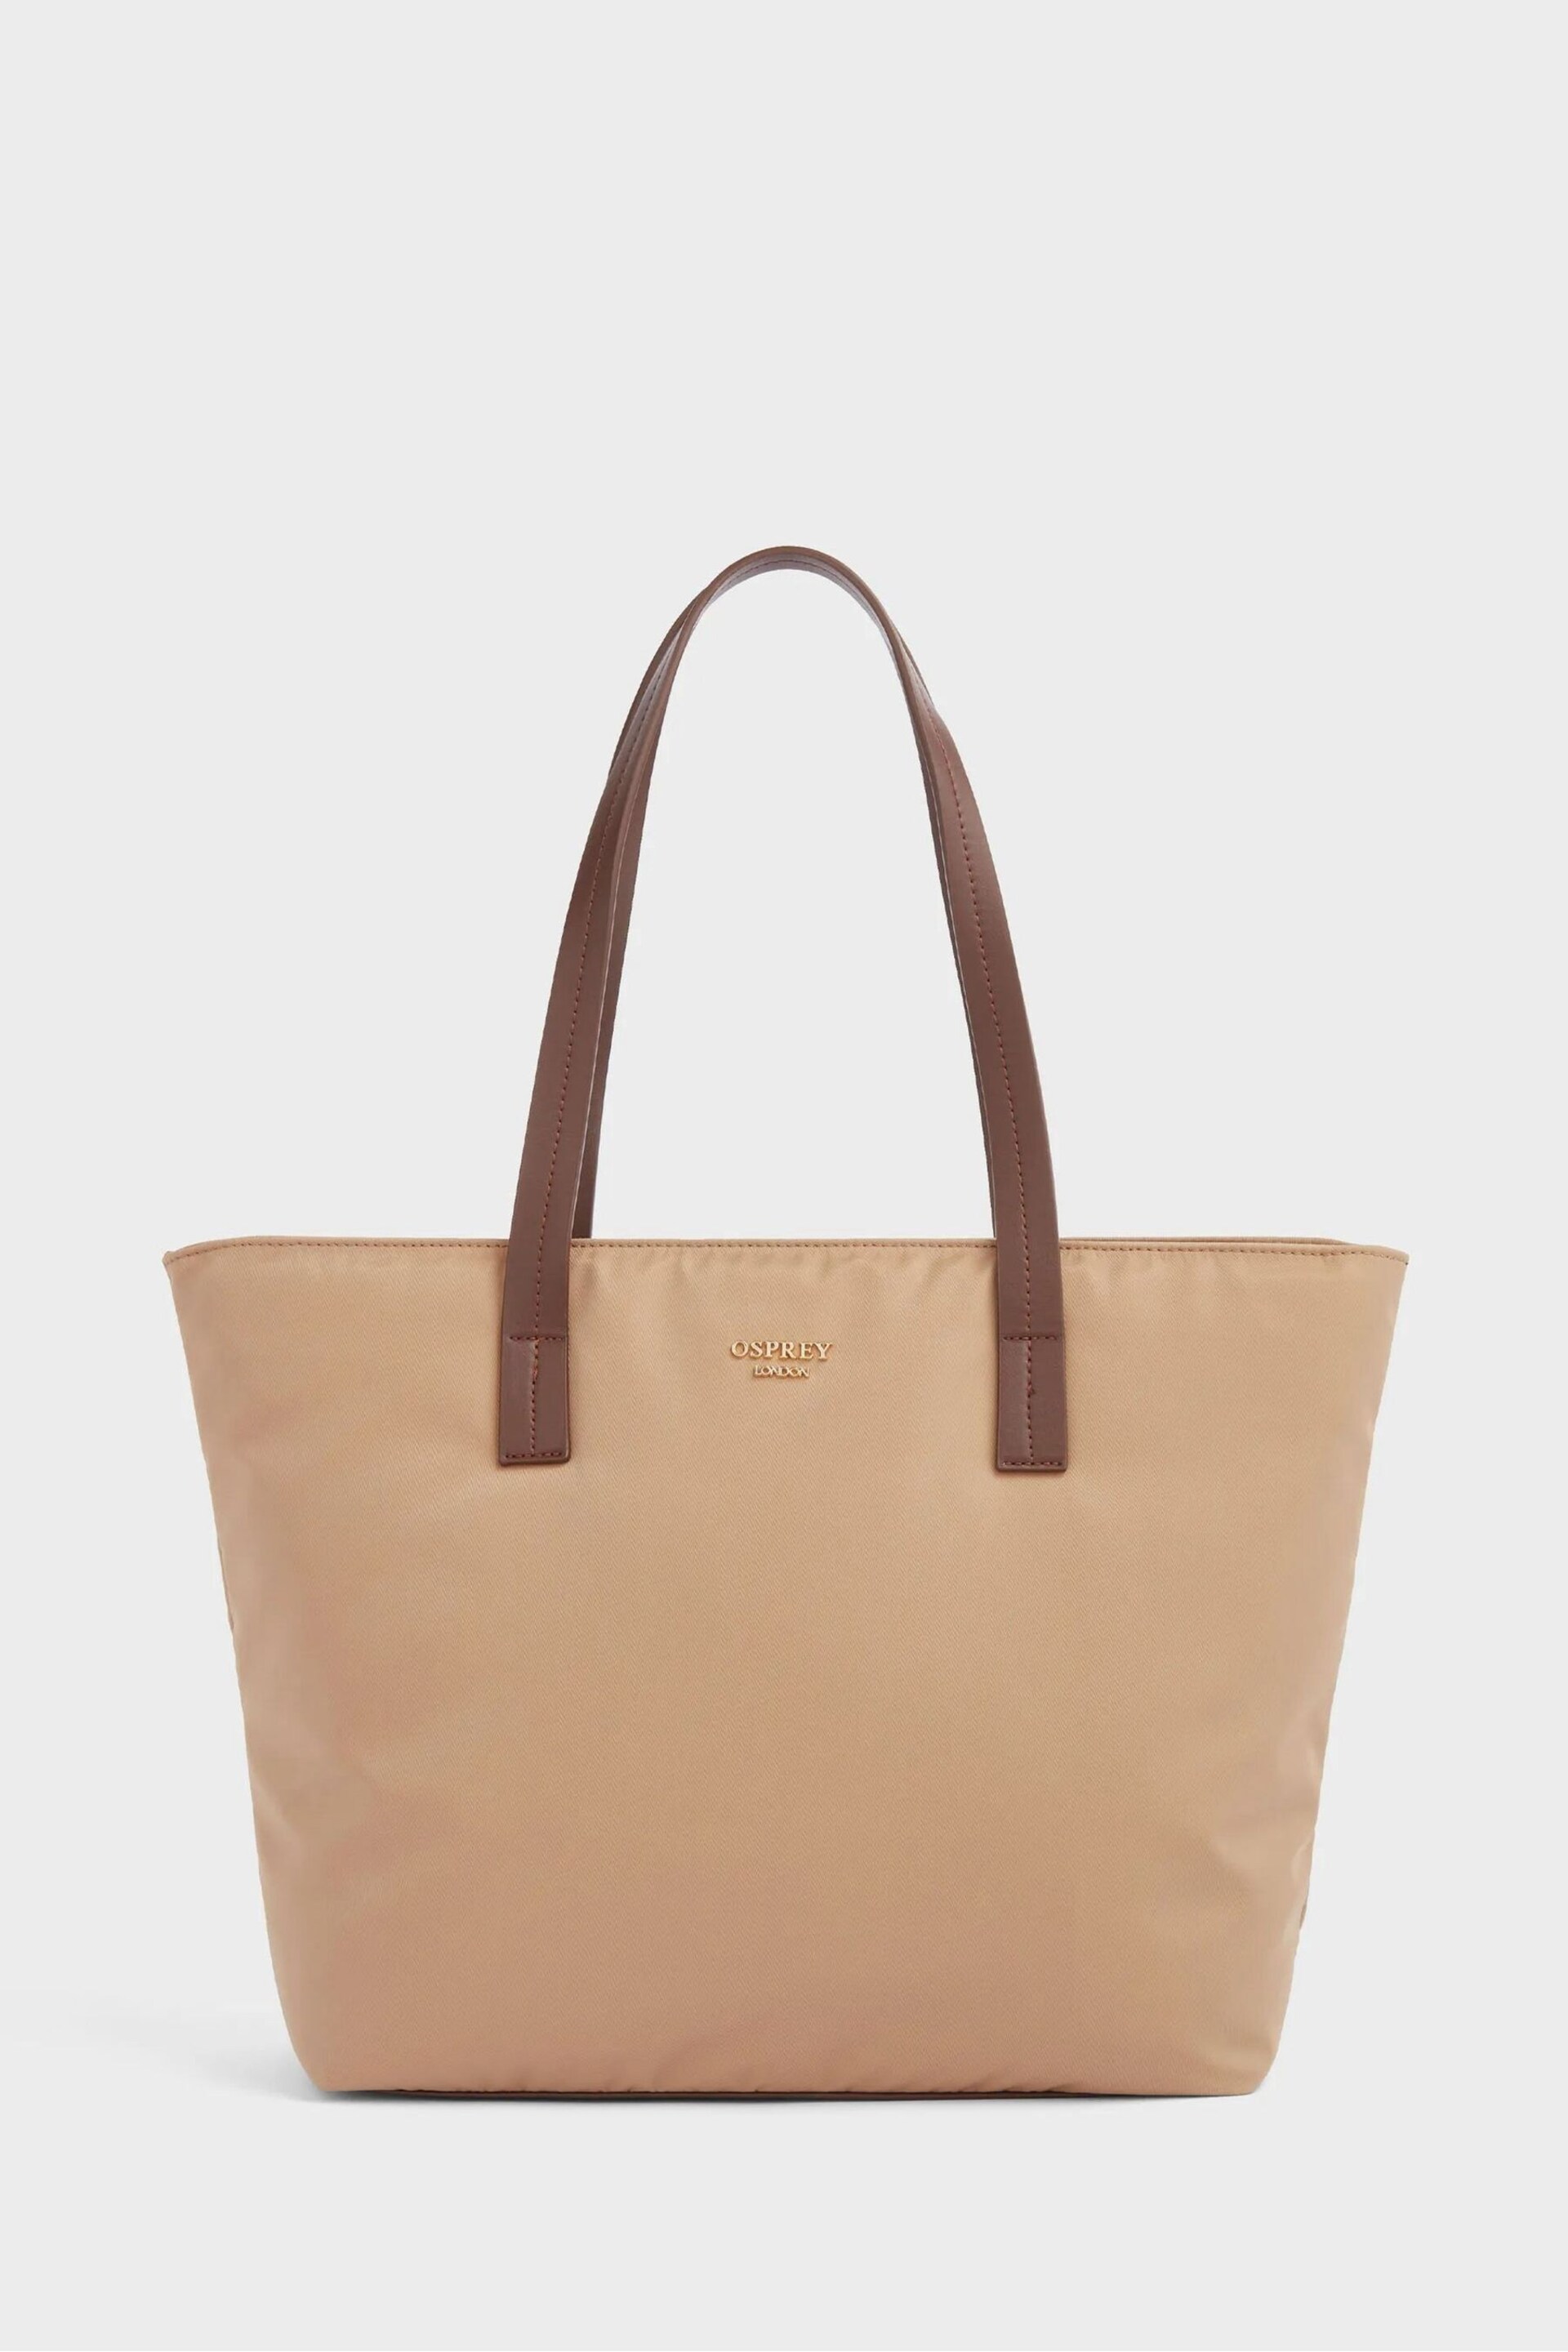 OSPREY LONDON The Wanderer Nylon Tote Bag With RFID Protection - Image 1 of 4